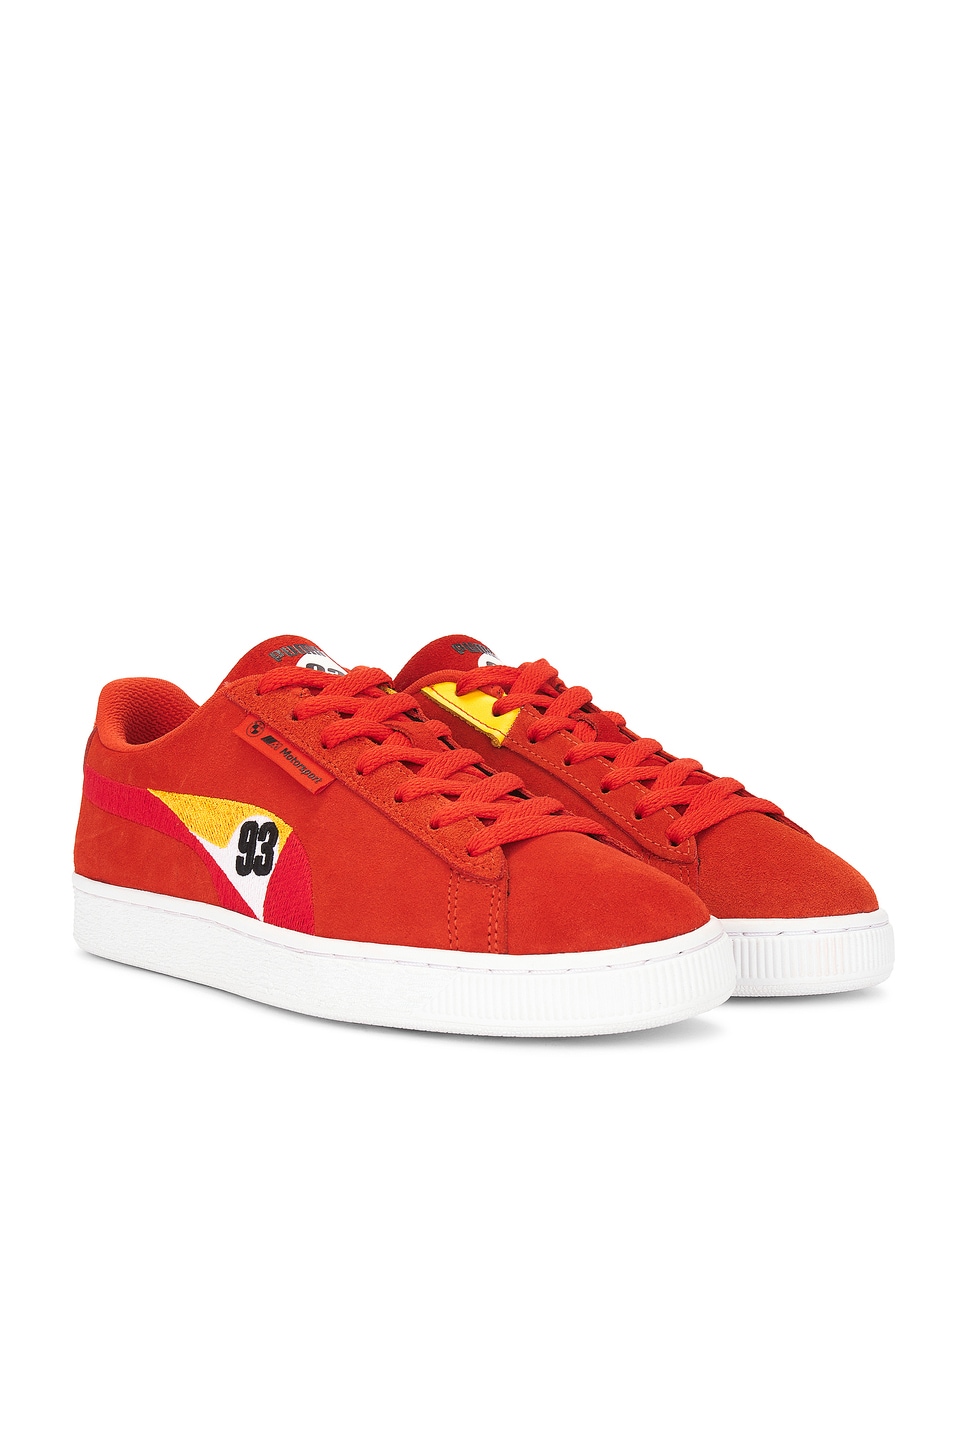 Image 1 of Puma Select x BMW MMS Suede Calder in For All Time Red, Speed Yellow, & Racing Blue